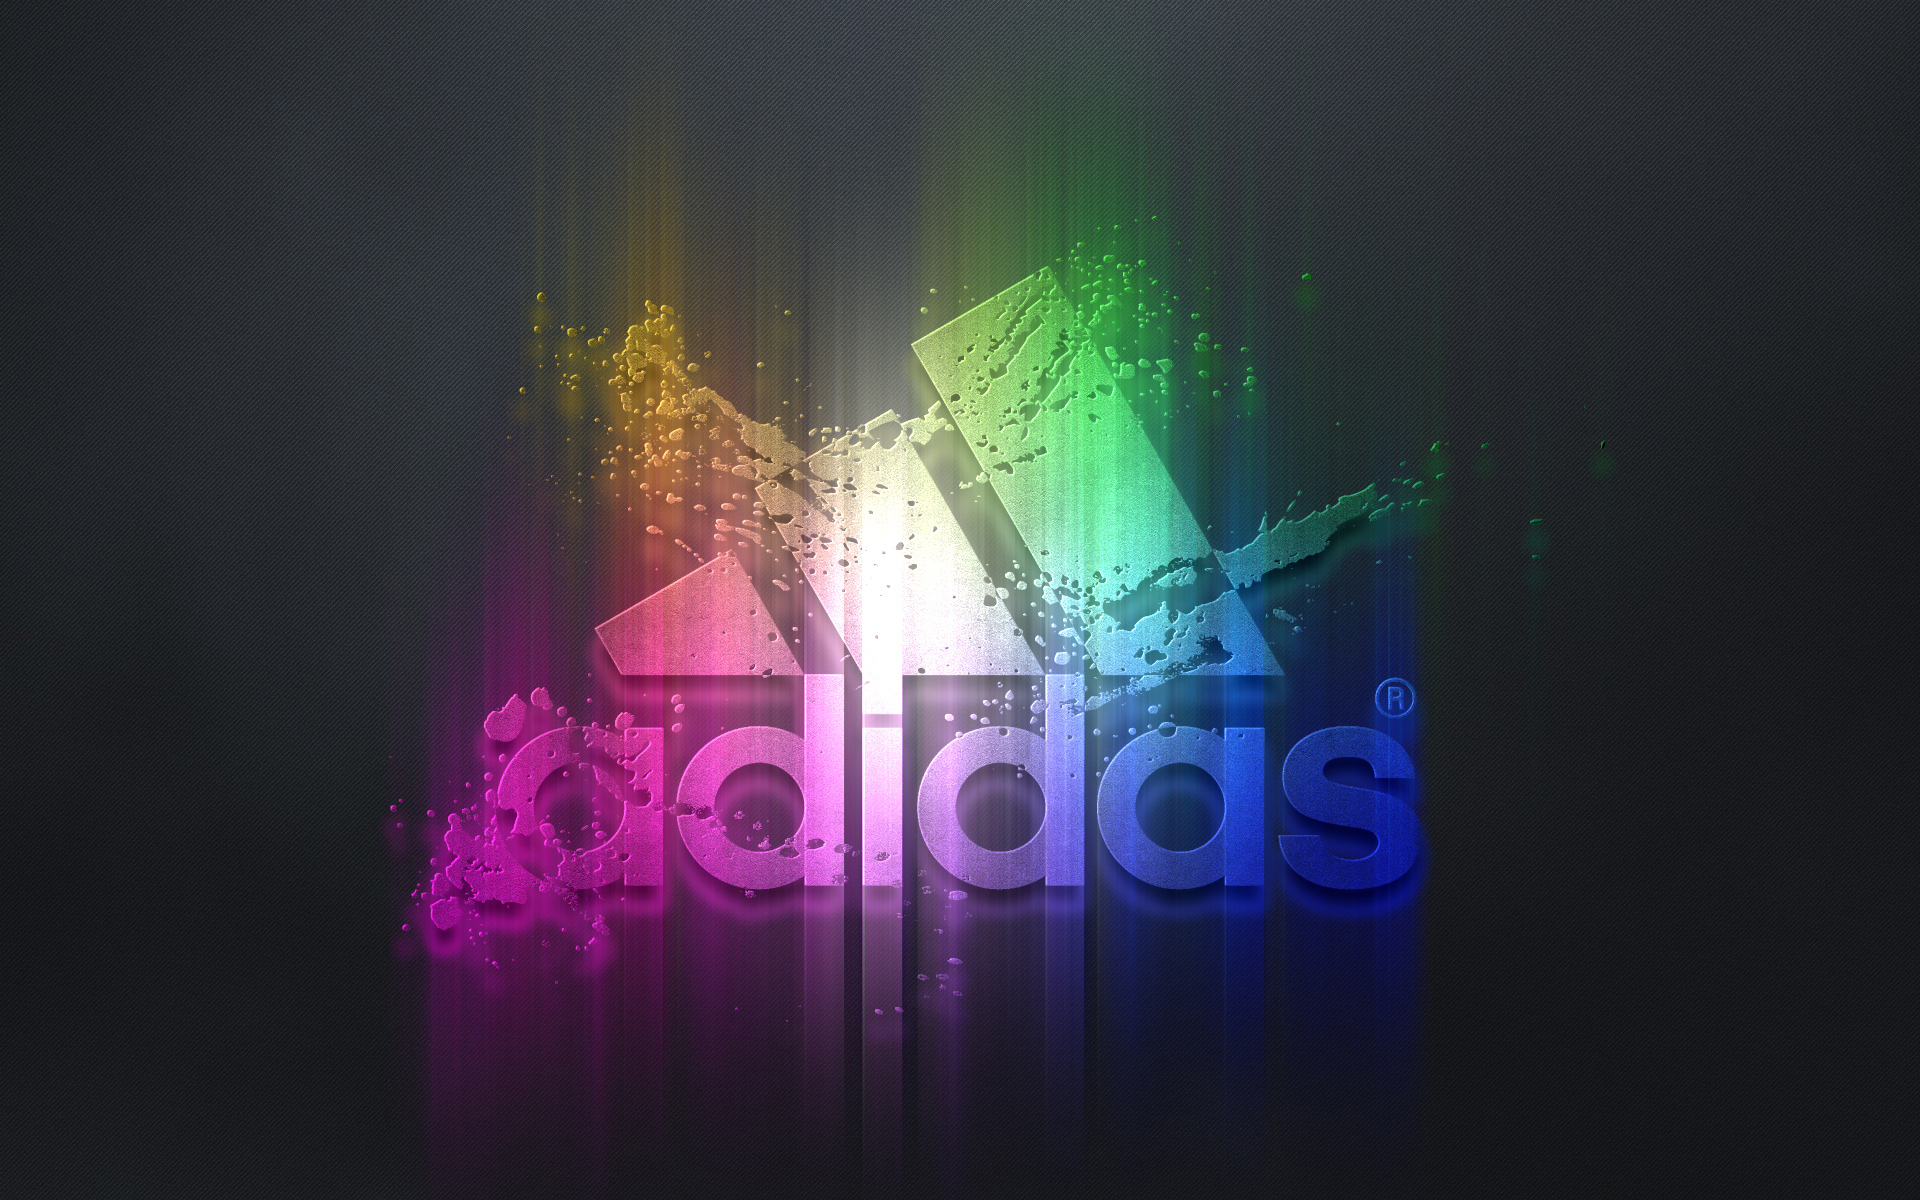 cool wallpapers adidas